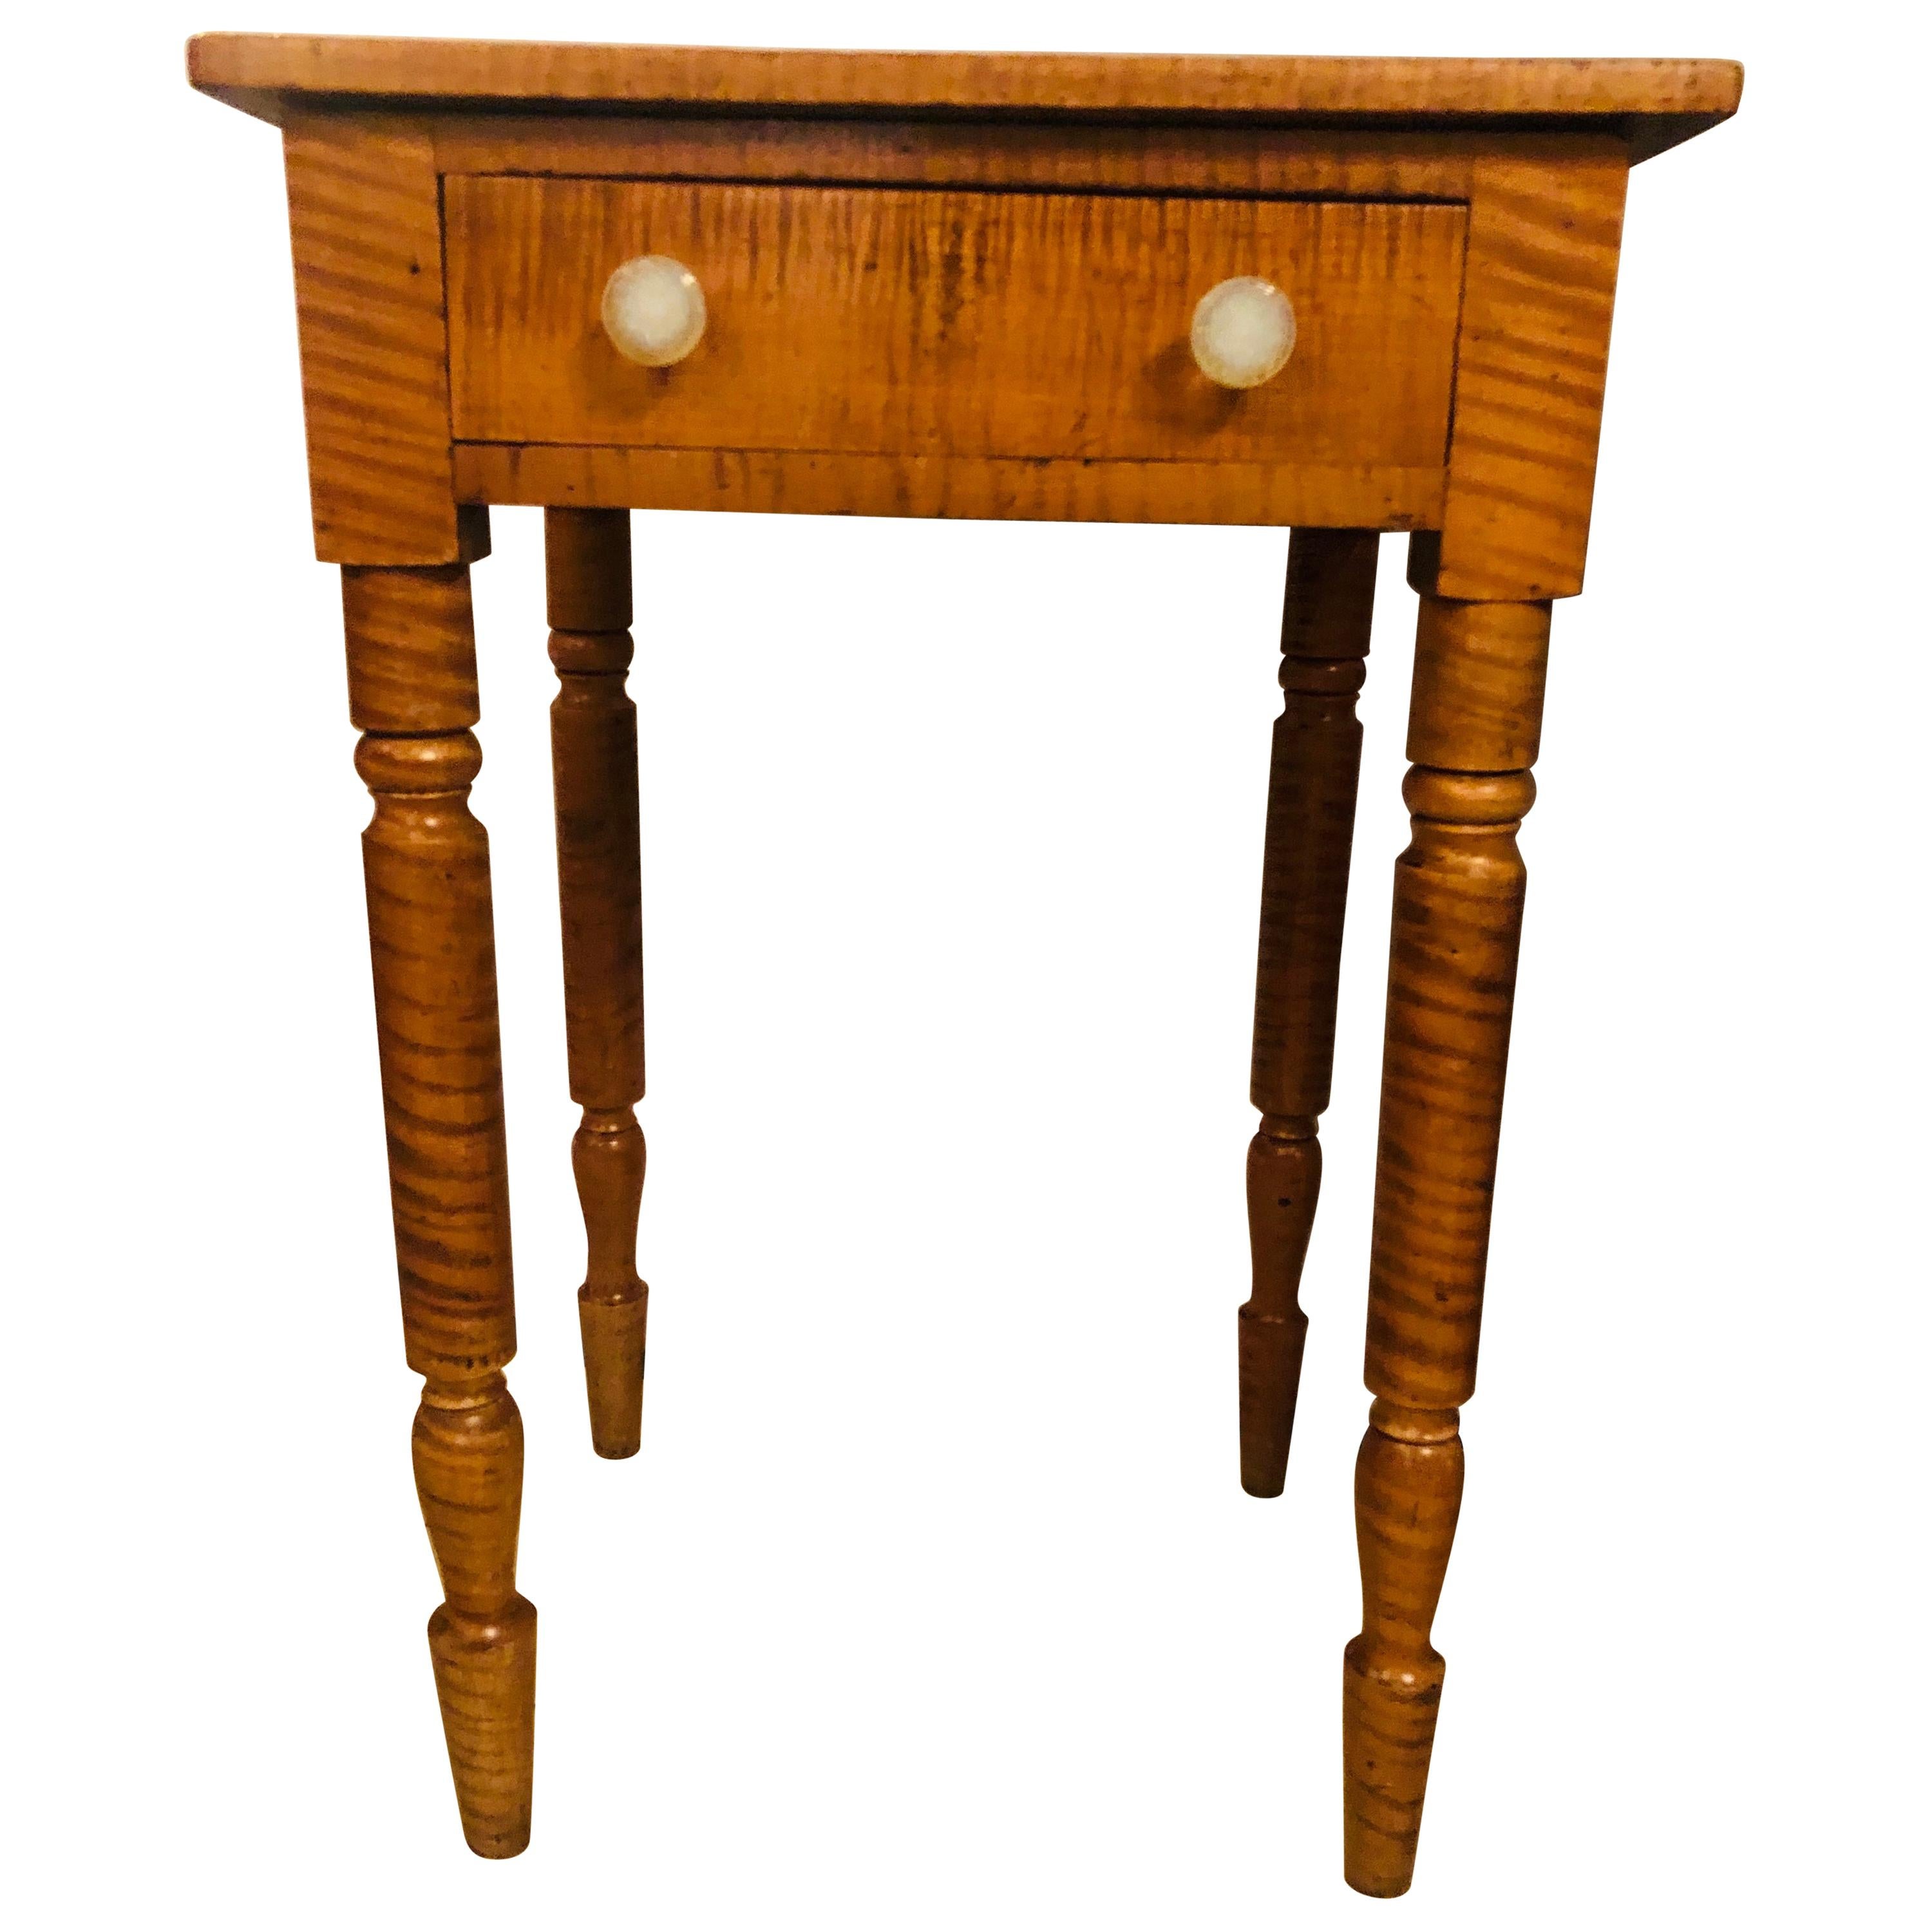 19th Century American Sheraton Cherry and Tiger Maple Stand with One Drawer